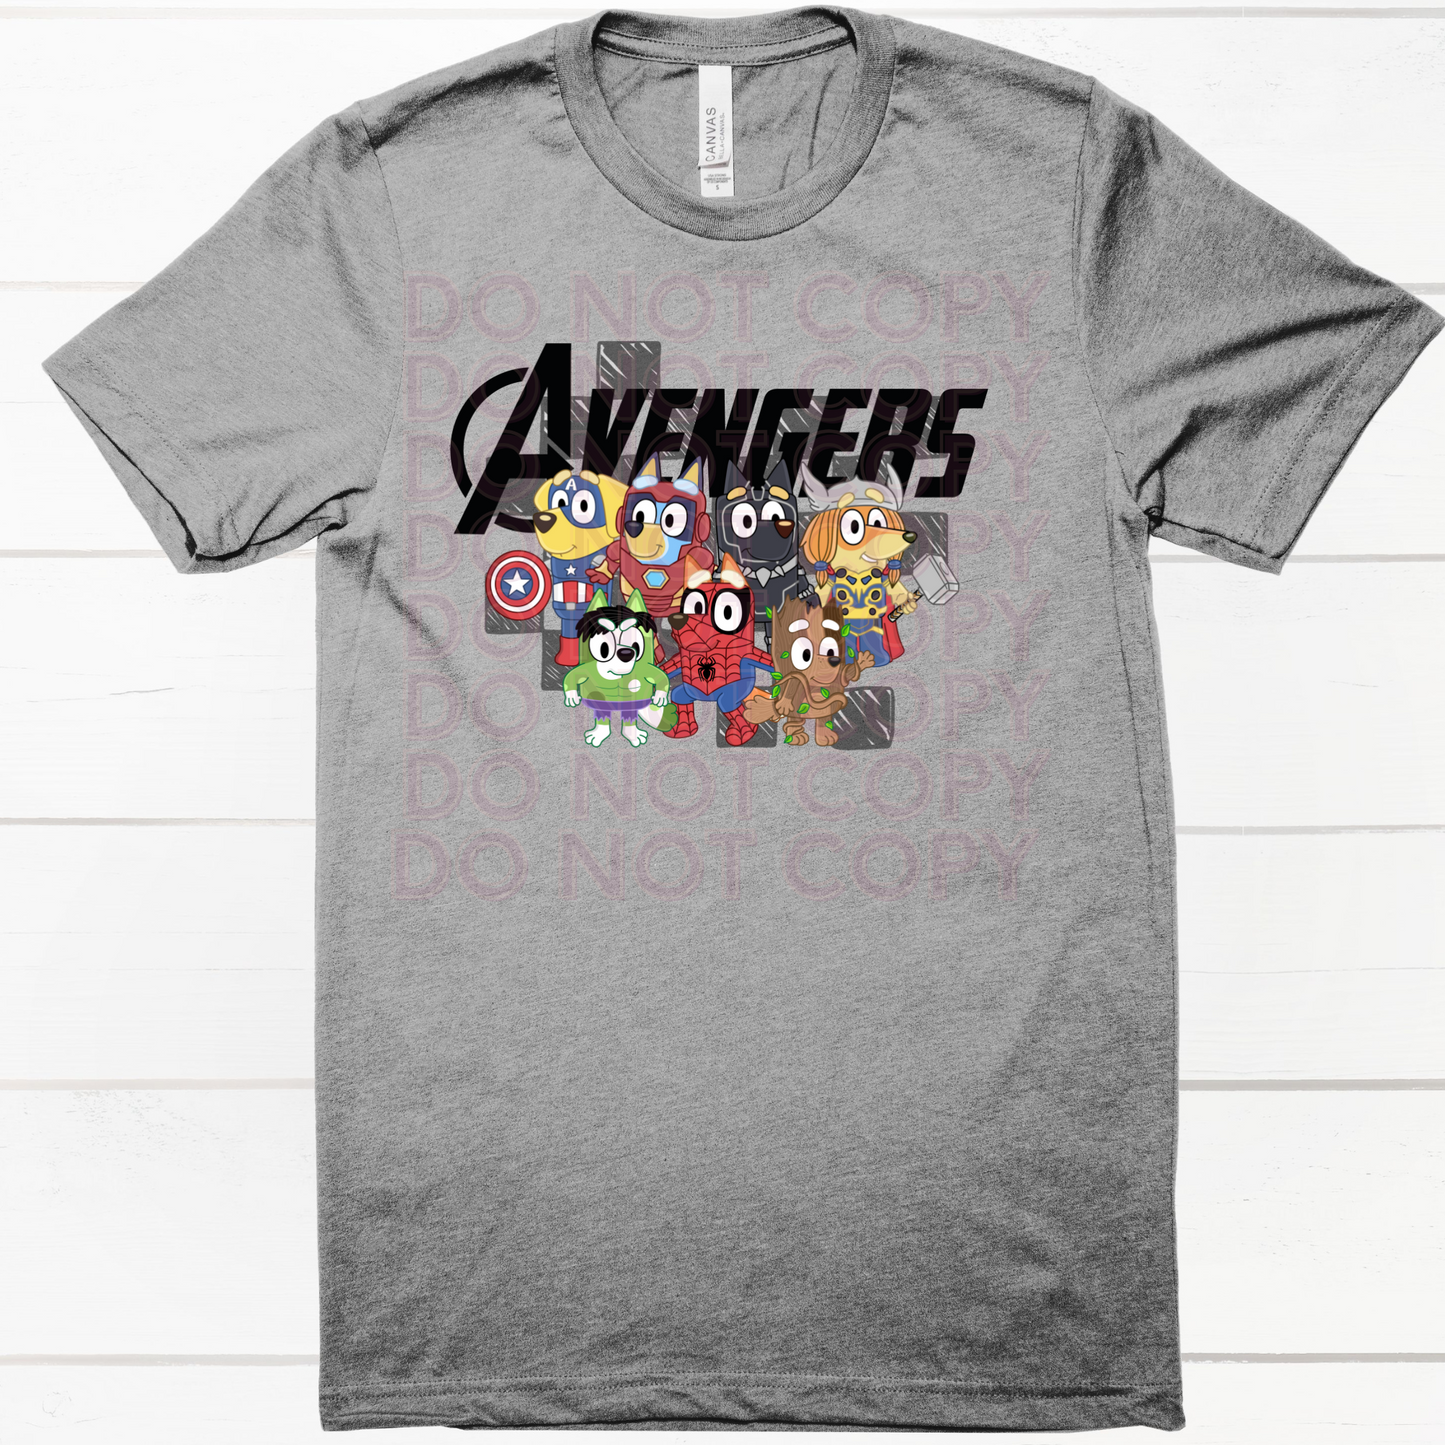 Everyone Assemble!  -Choose Your shirt & Design Style- Adult Sizes - 2 Peas Tees